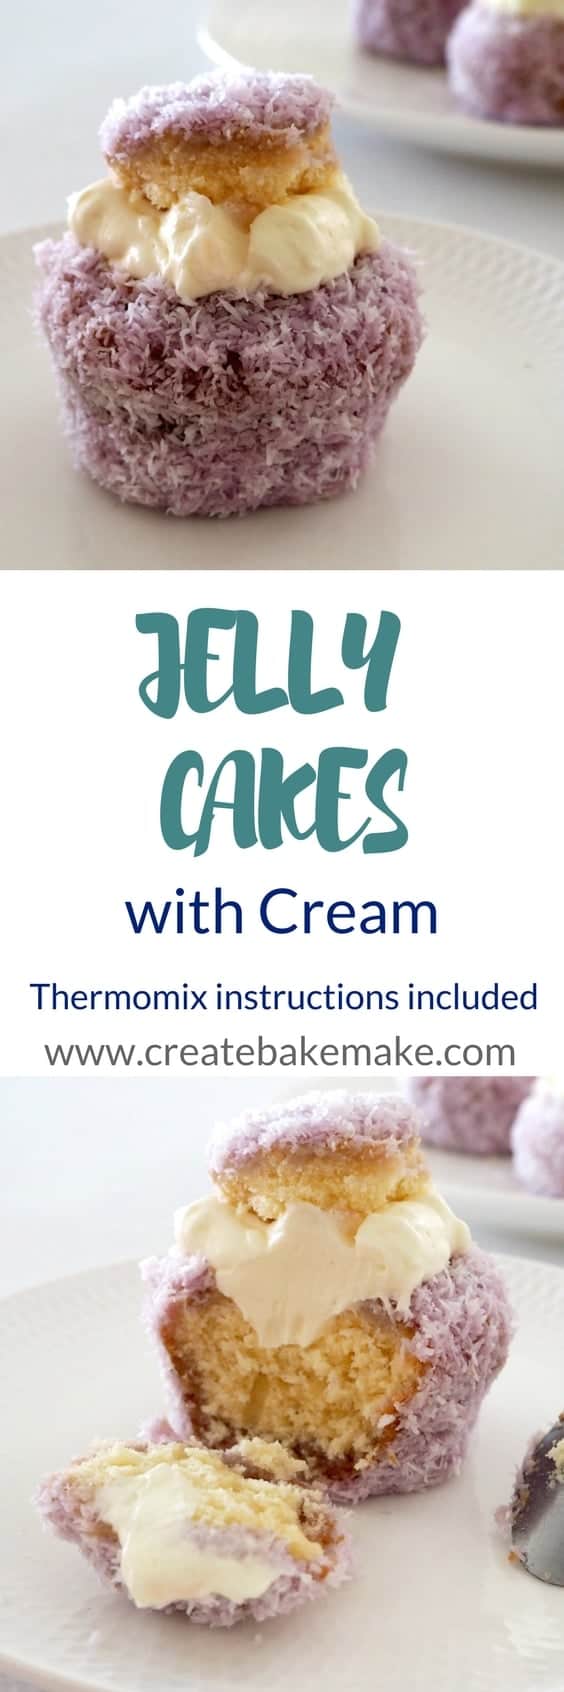 Simple Jelly Cakes with Cream